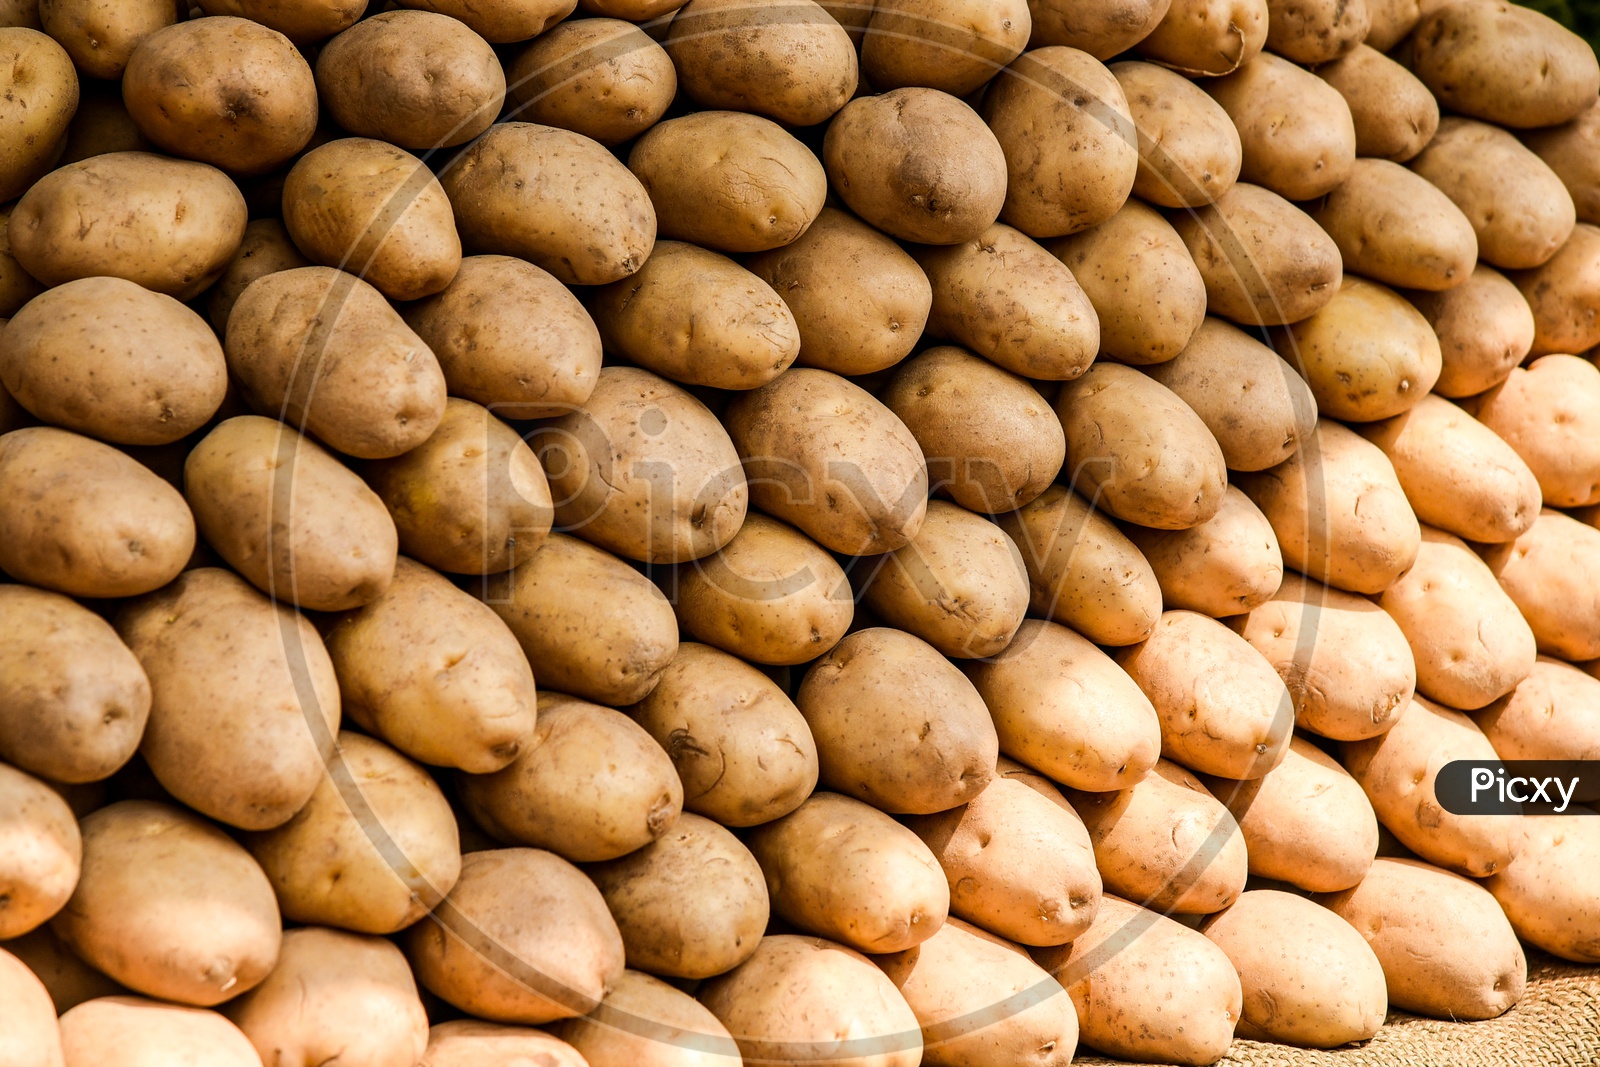 Potatoes displayed for sale.